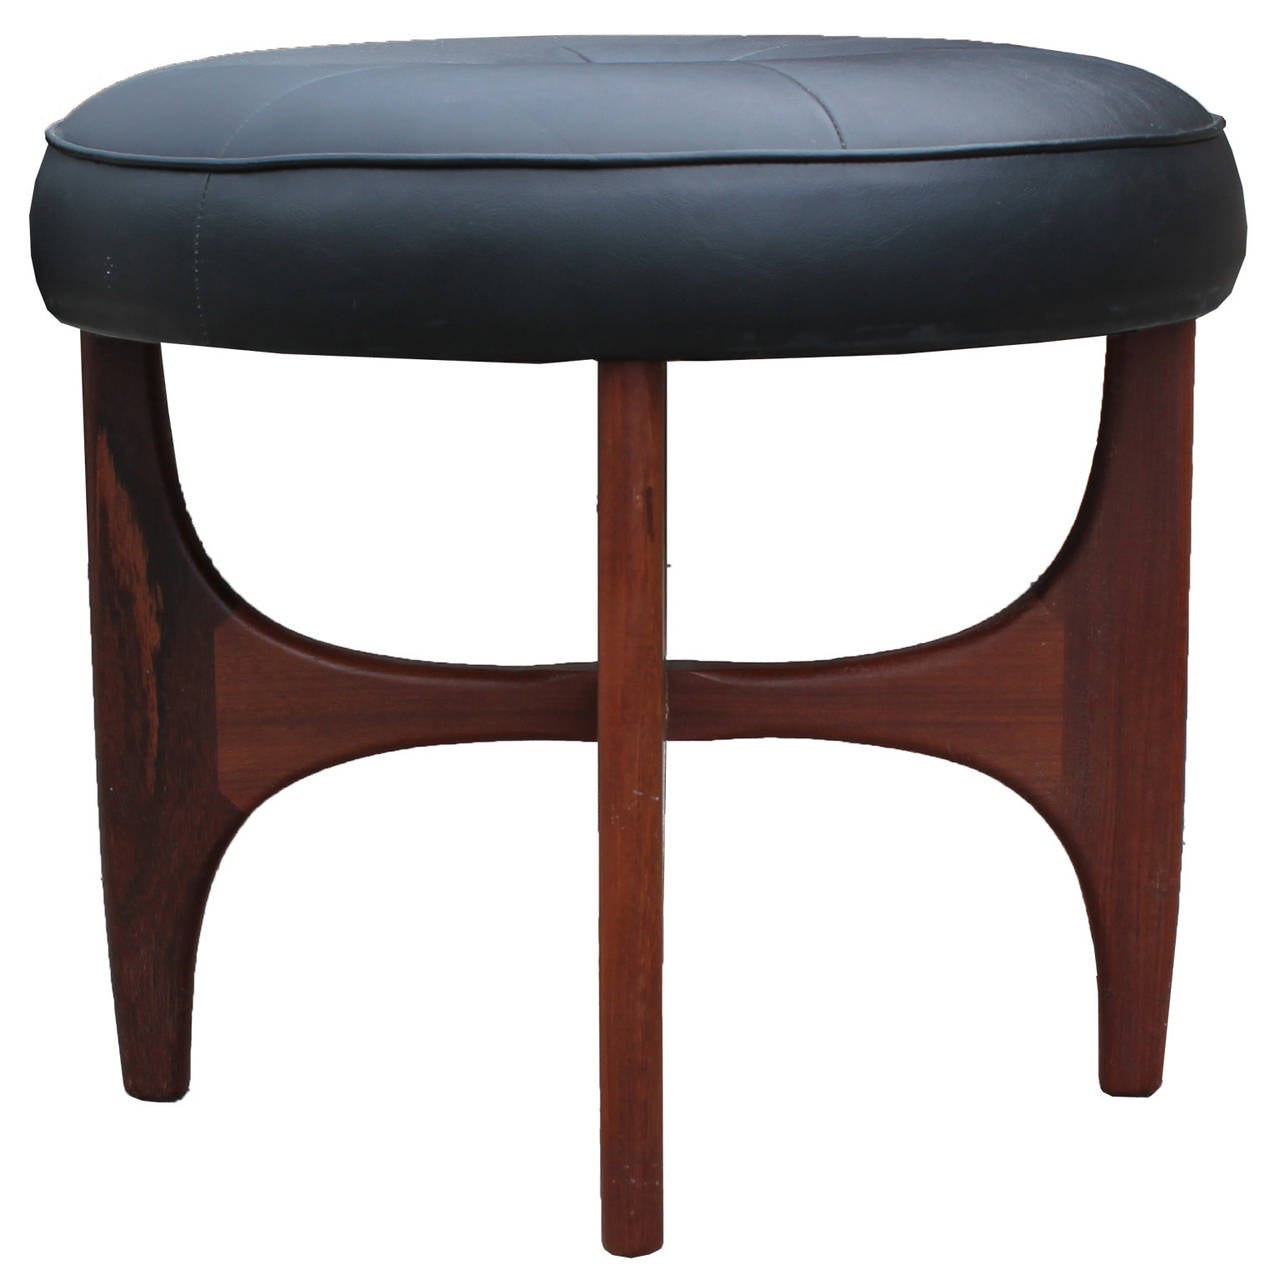 Beautiful pair of sculptural ottomans or stools. Wooden bases are of excellent quality and have an organic feel. Seats are currently covered in black vinyl.